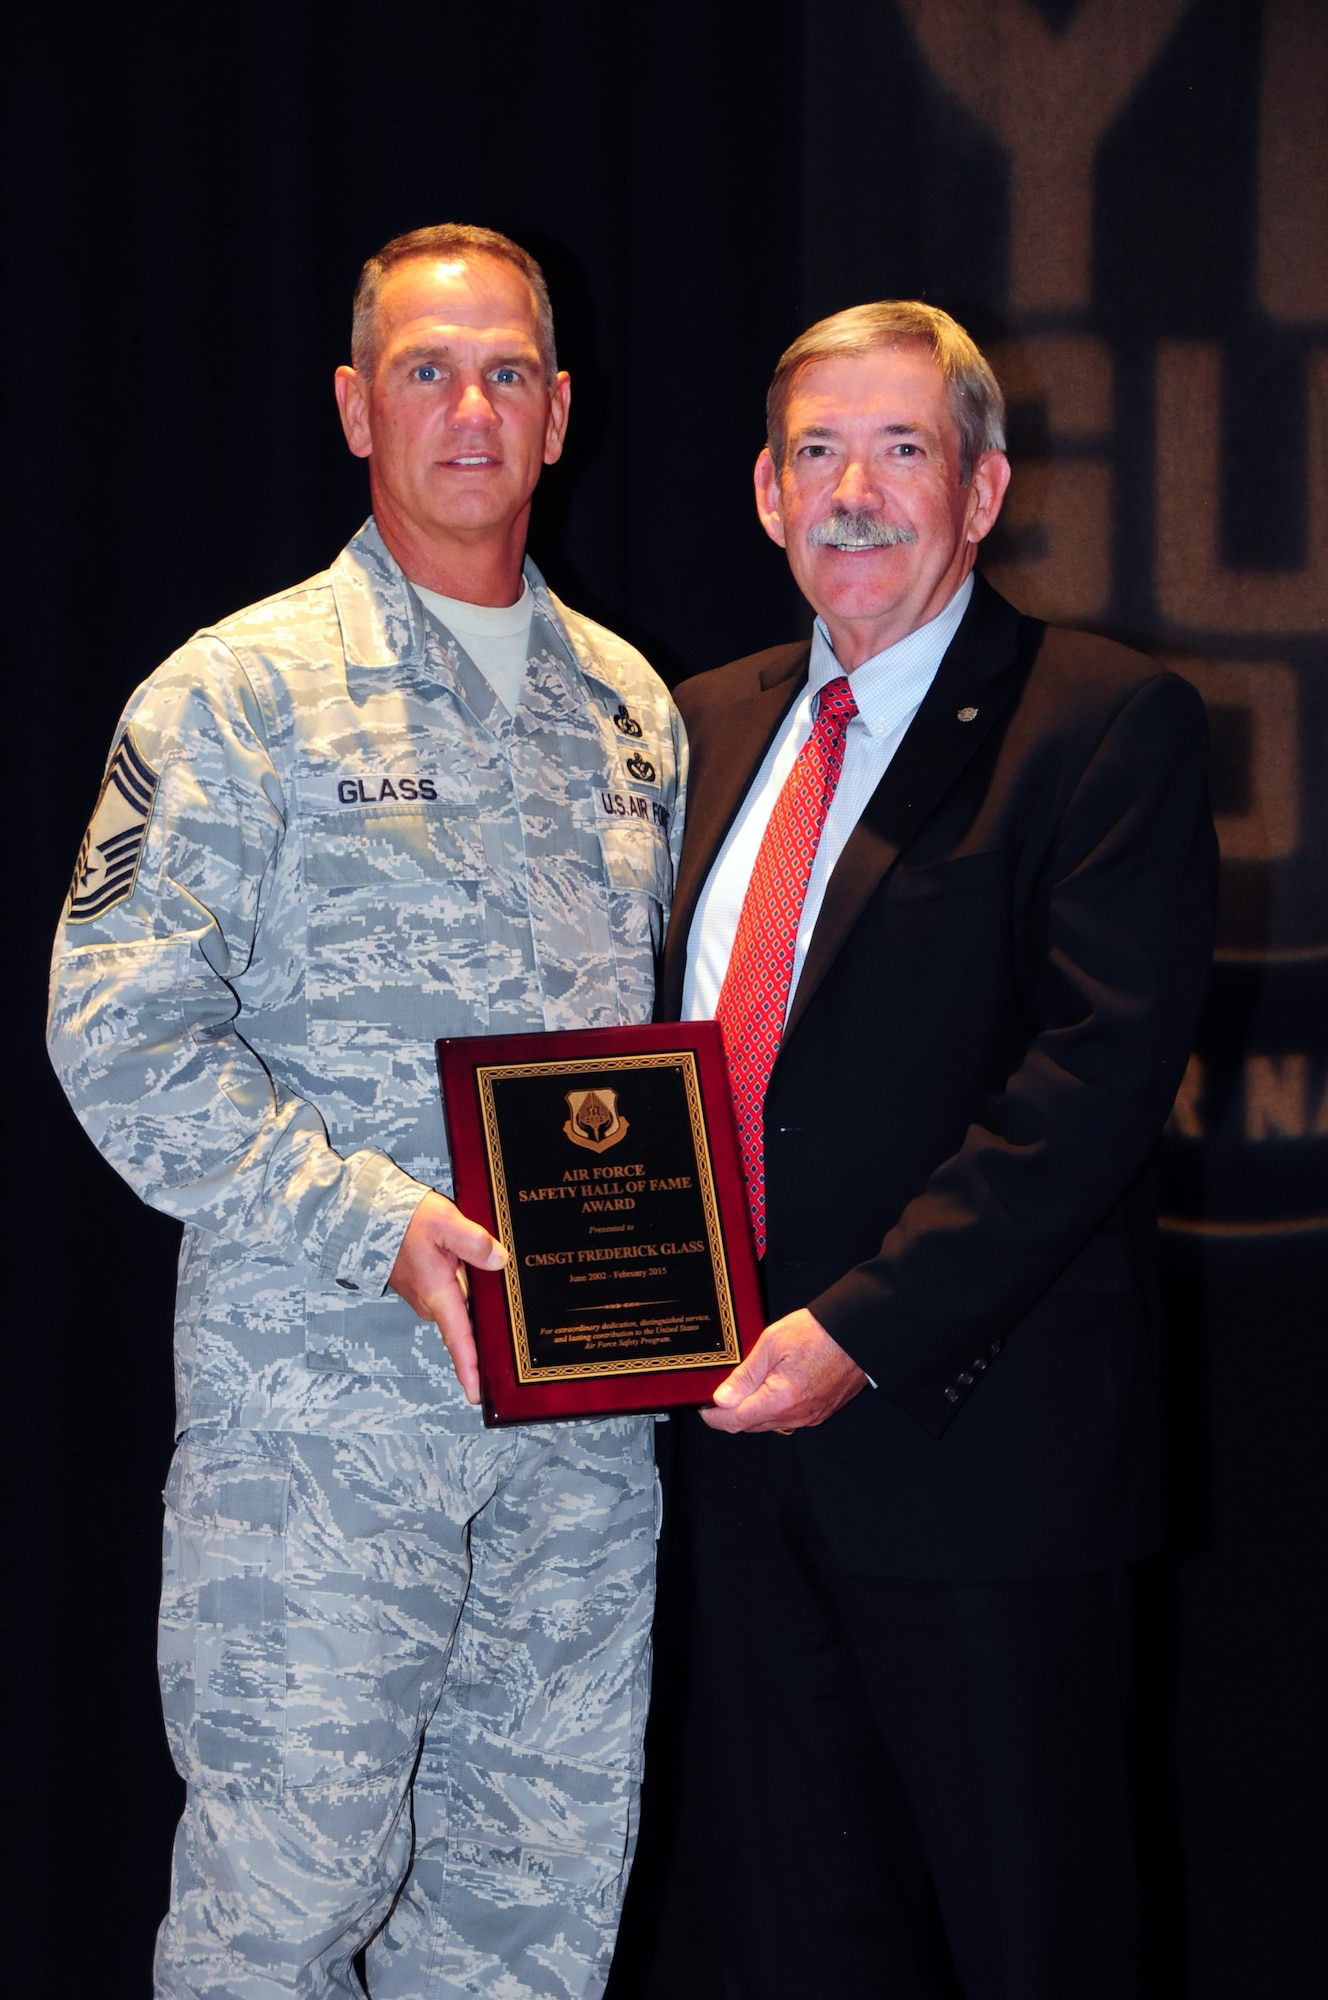 Chief Master Sgt. Frederick Glass, Air National Guard chief of occupational safety, stands with chief of Air Force ground safety, Bill Parsons, after being presented the Air Force Safety Hall of Fame Award at the Air National Guard Mishap Prevention Workshop held in Albuquerque, New Mexico, May 12, 2015. Glass is the first enlisted ANG member to receive the award since its inception in 1977. (U.S. Air National Guard photo by Master Sgt. Paula Aragon)